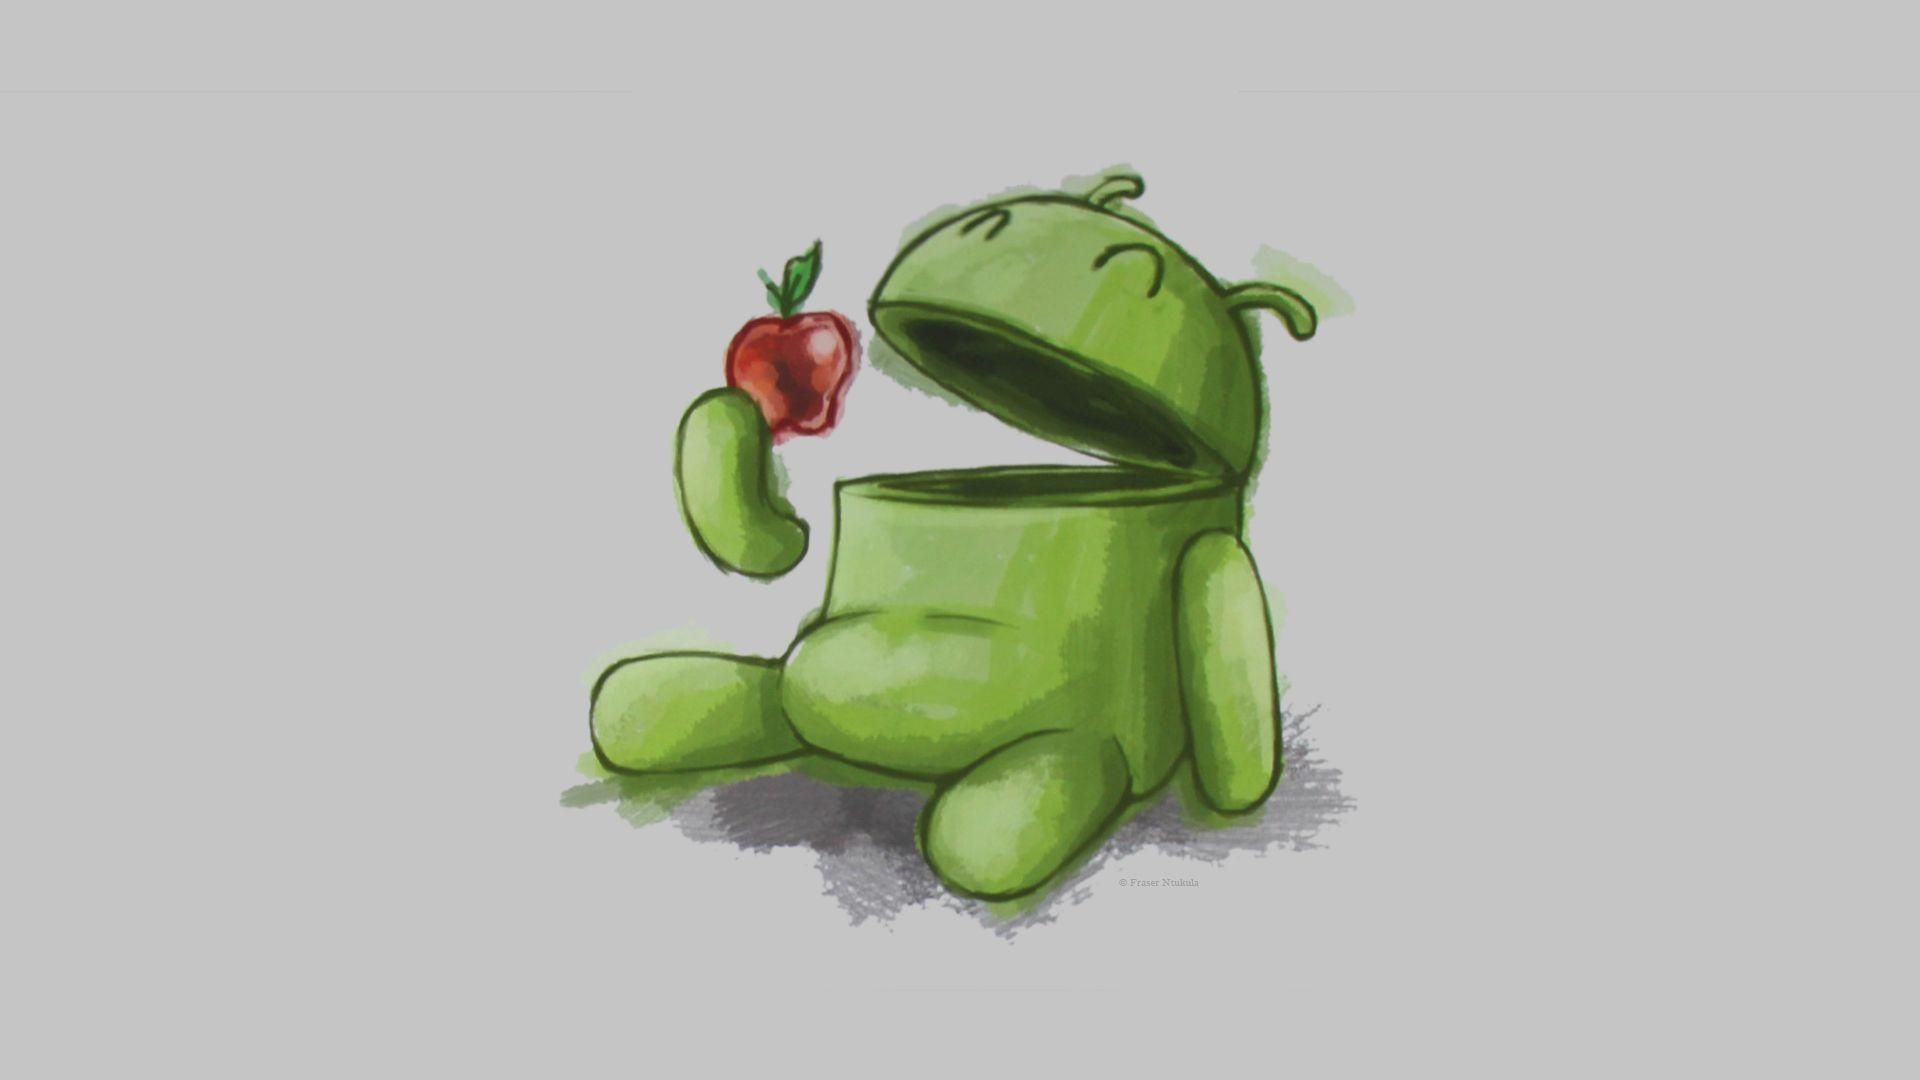 Android vs Apple